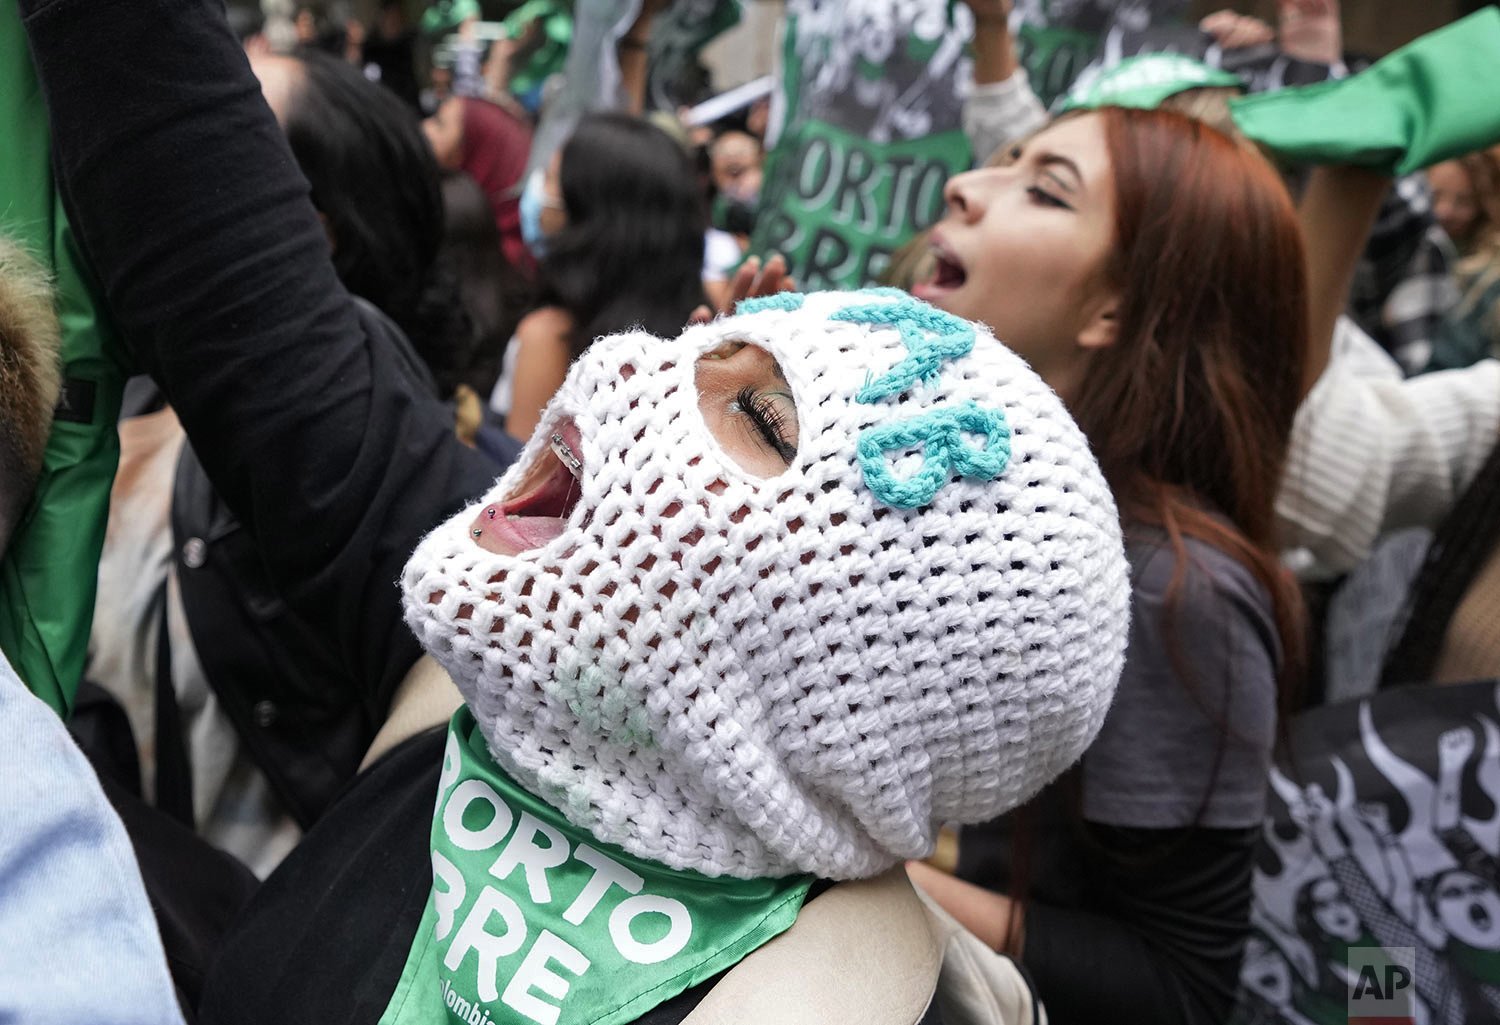  Abortion-rights activists celebrate after the Constitutional Court approved the decriminalization of abortion, lifting all limitations on the procedure until the 24th week of pregnancy, in Bogota, Colombia, Feb. 21, 2022. (AP Photo/Fernando Vergara)